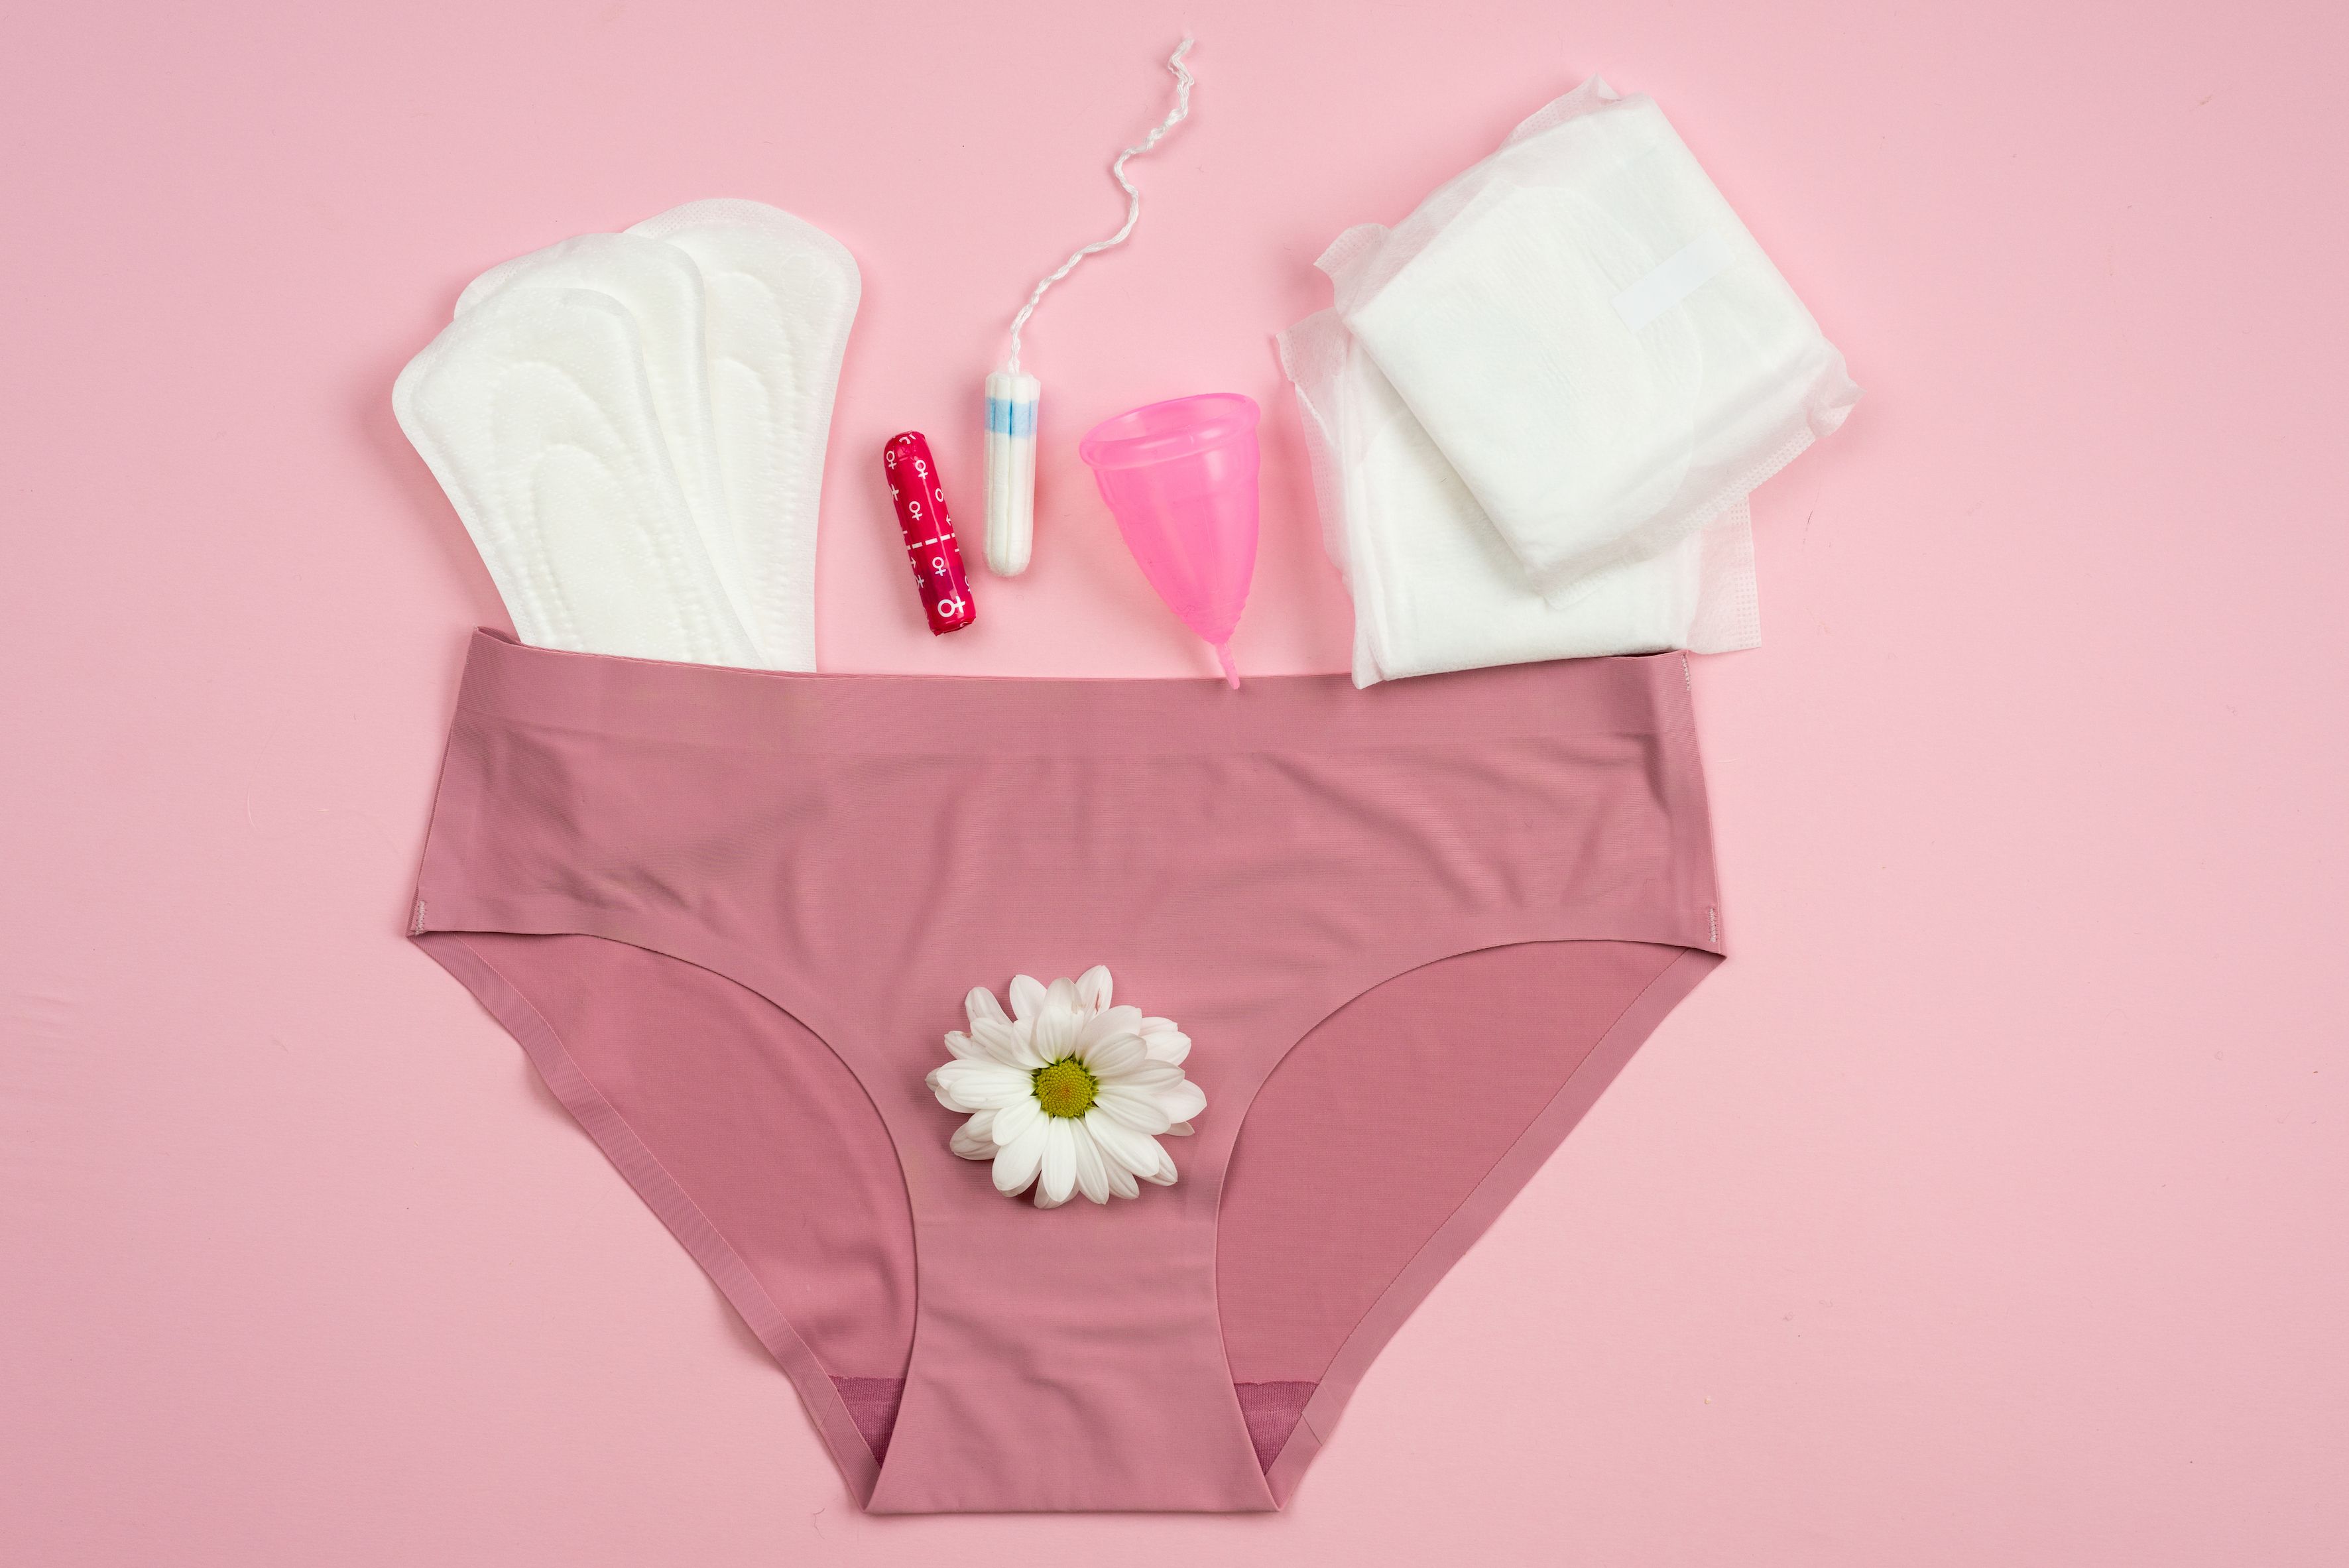 Buy Victoria's Secret PINK Pink Berry Period Sleep Short from the